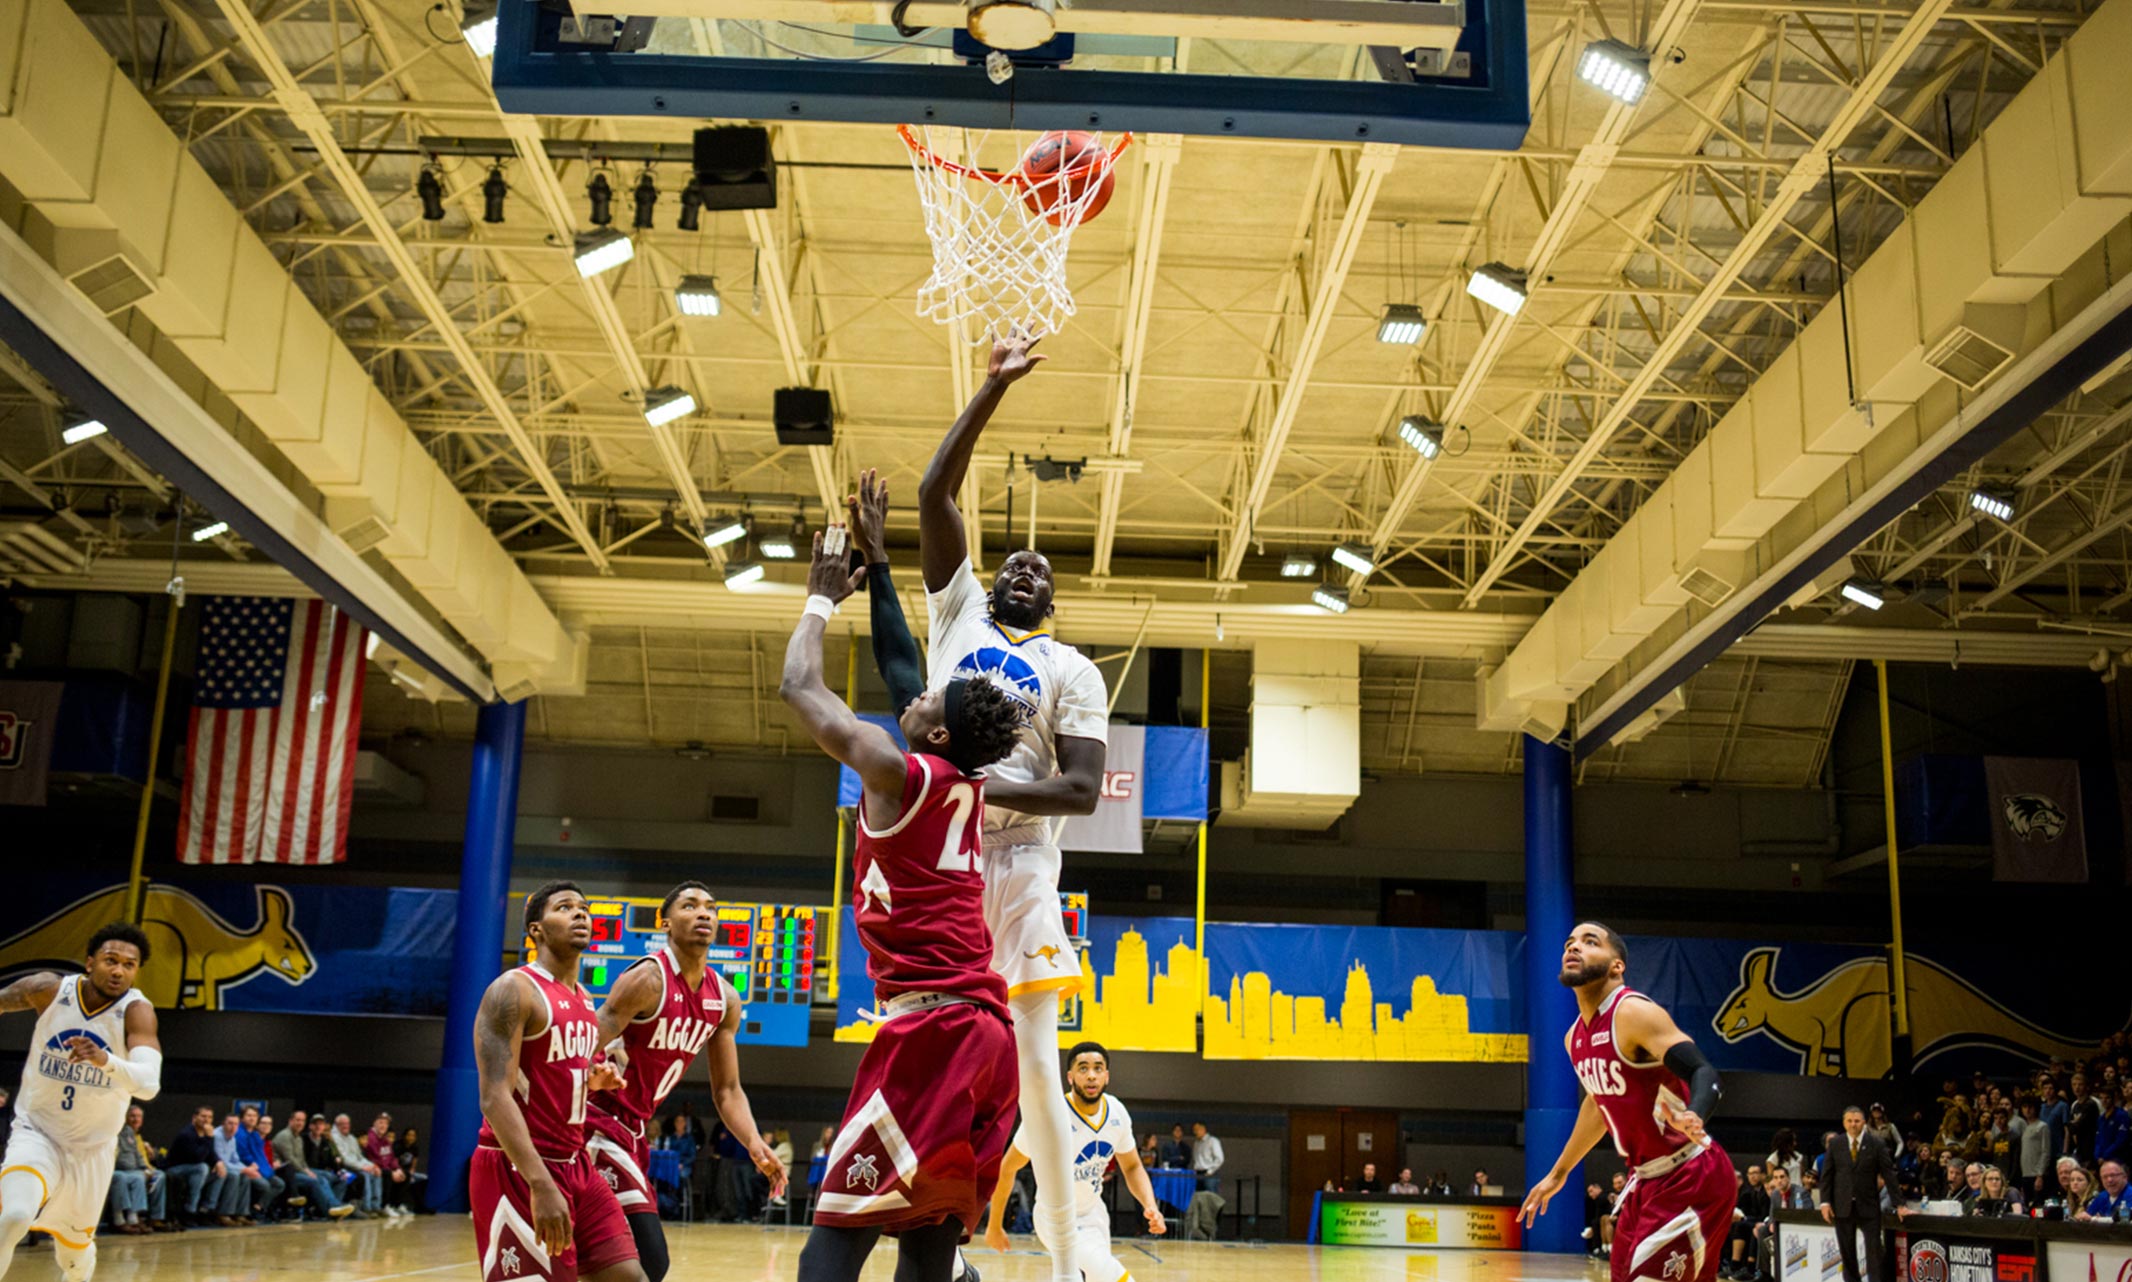 UMKC men's basketball player lays the ball up over several opponents